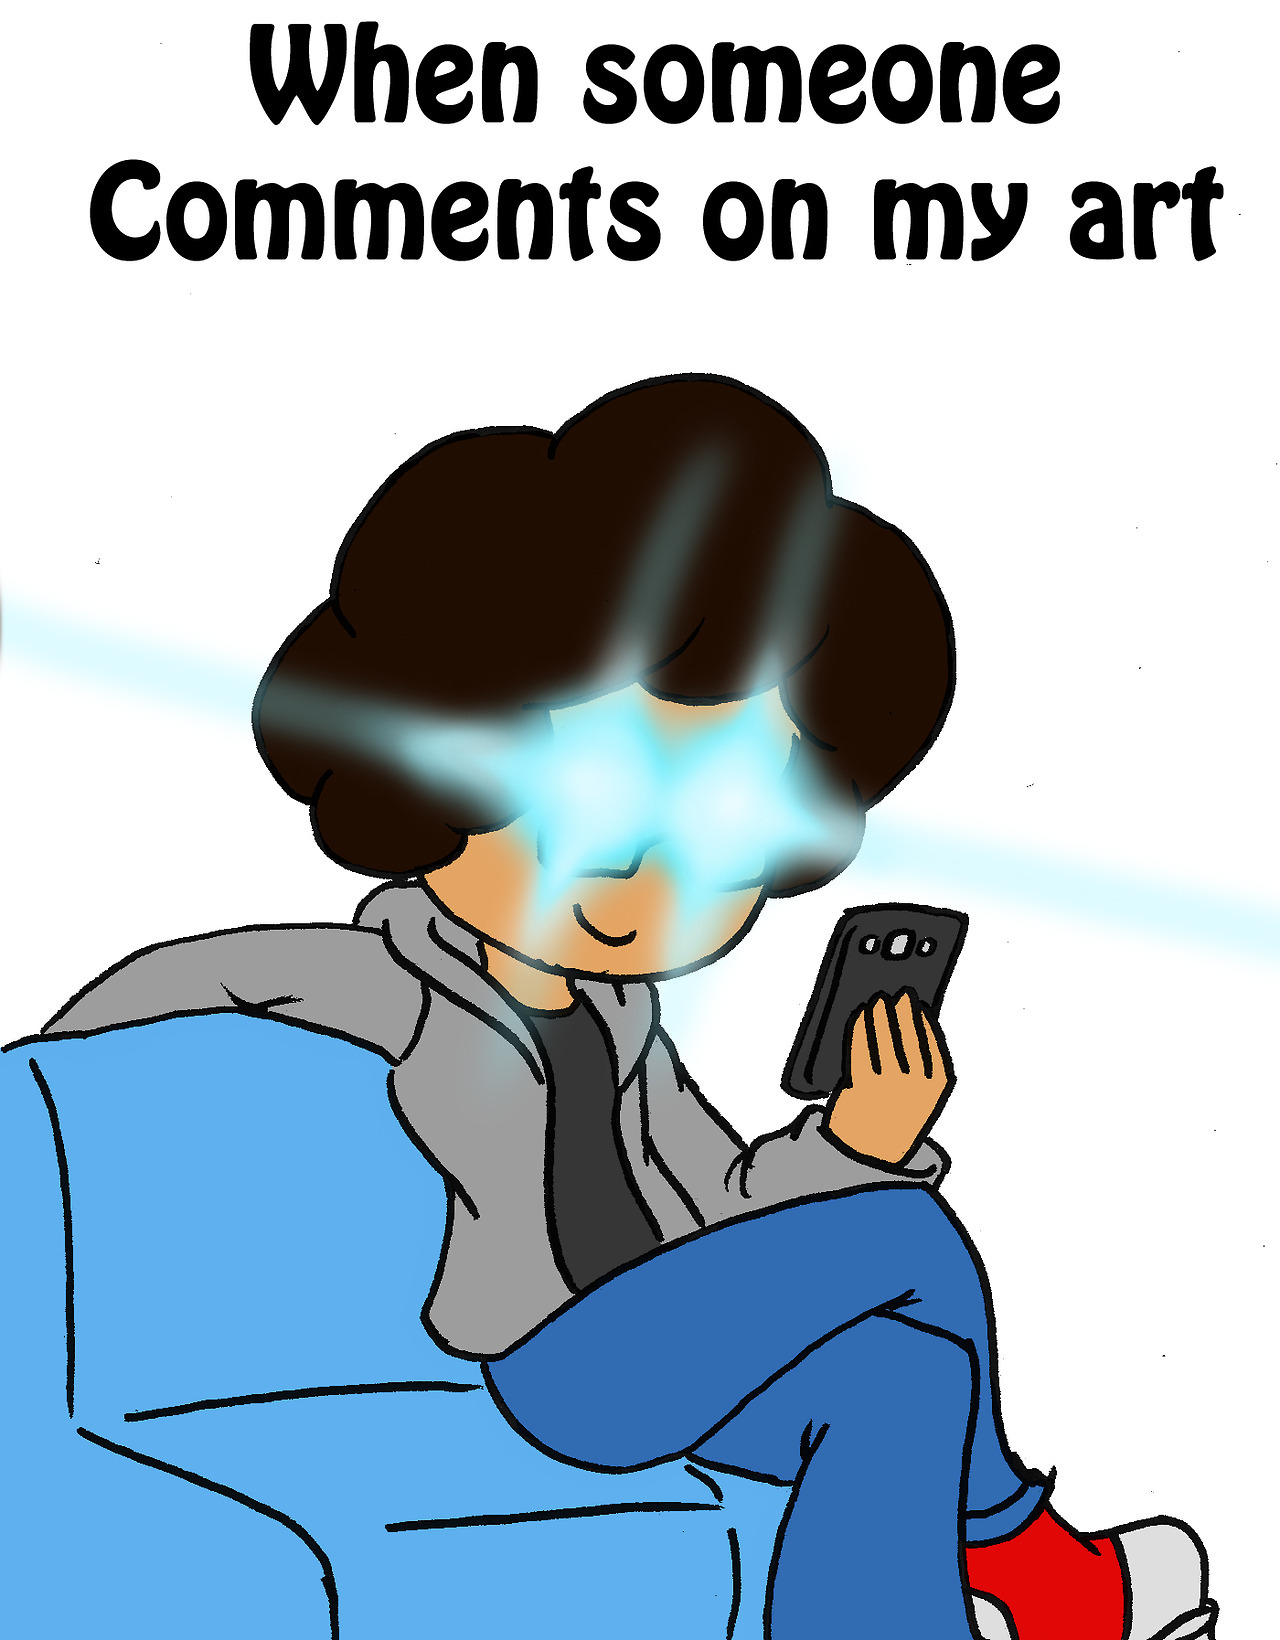 I’ve been seeing a lot of relatable artist comics on Tumblr, so I decided to make